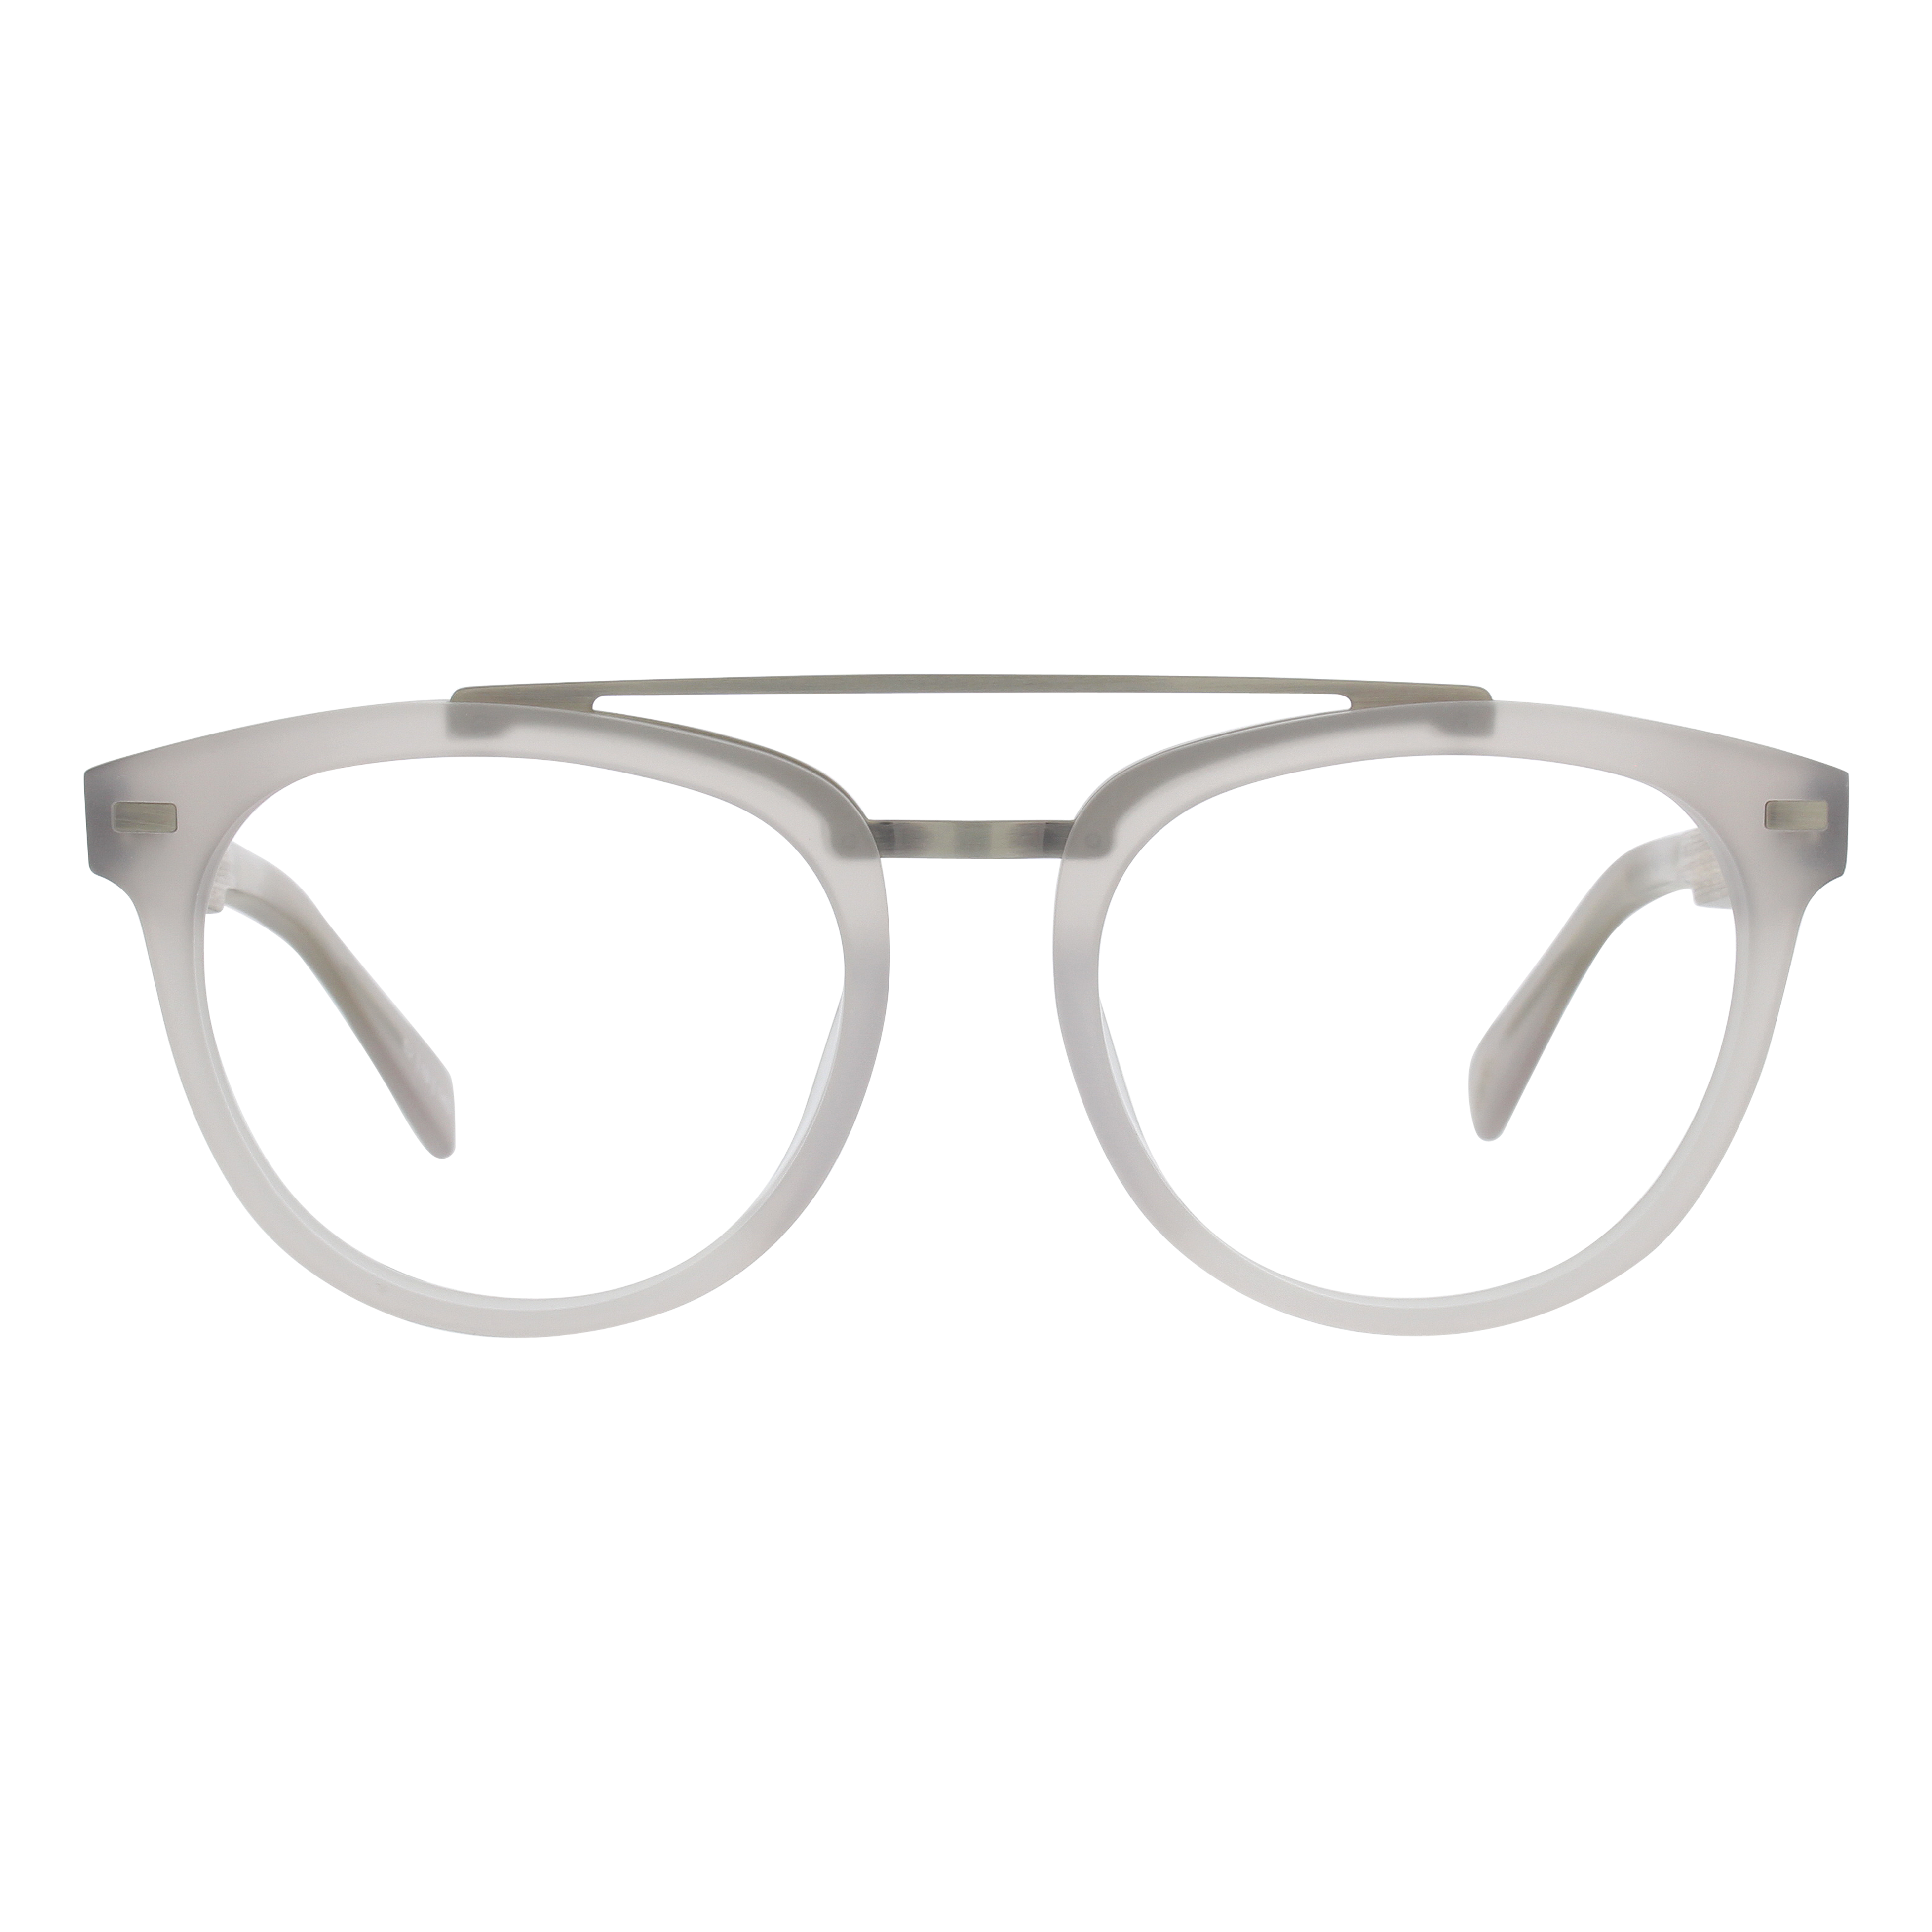 Captain Eyeglasses by Johnny Fly 